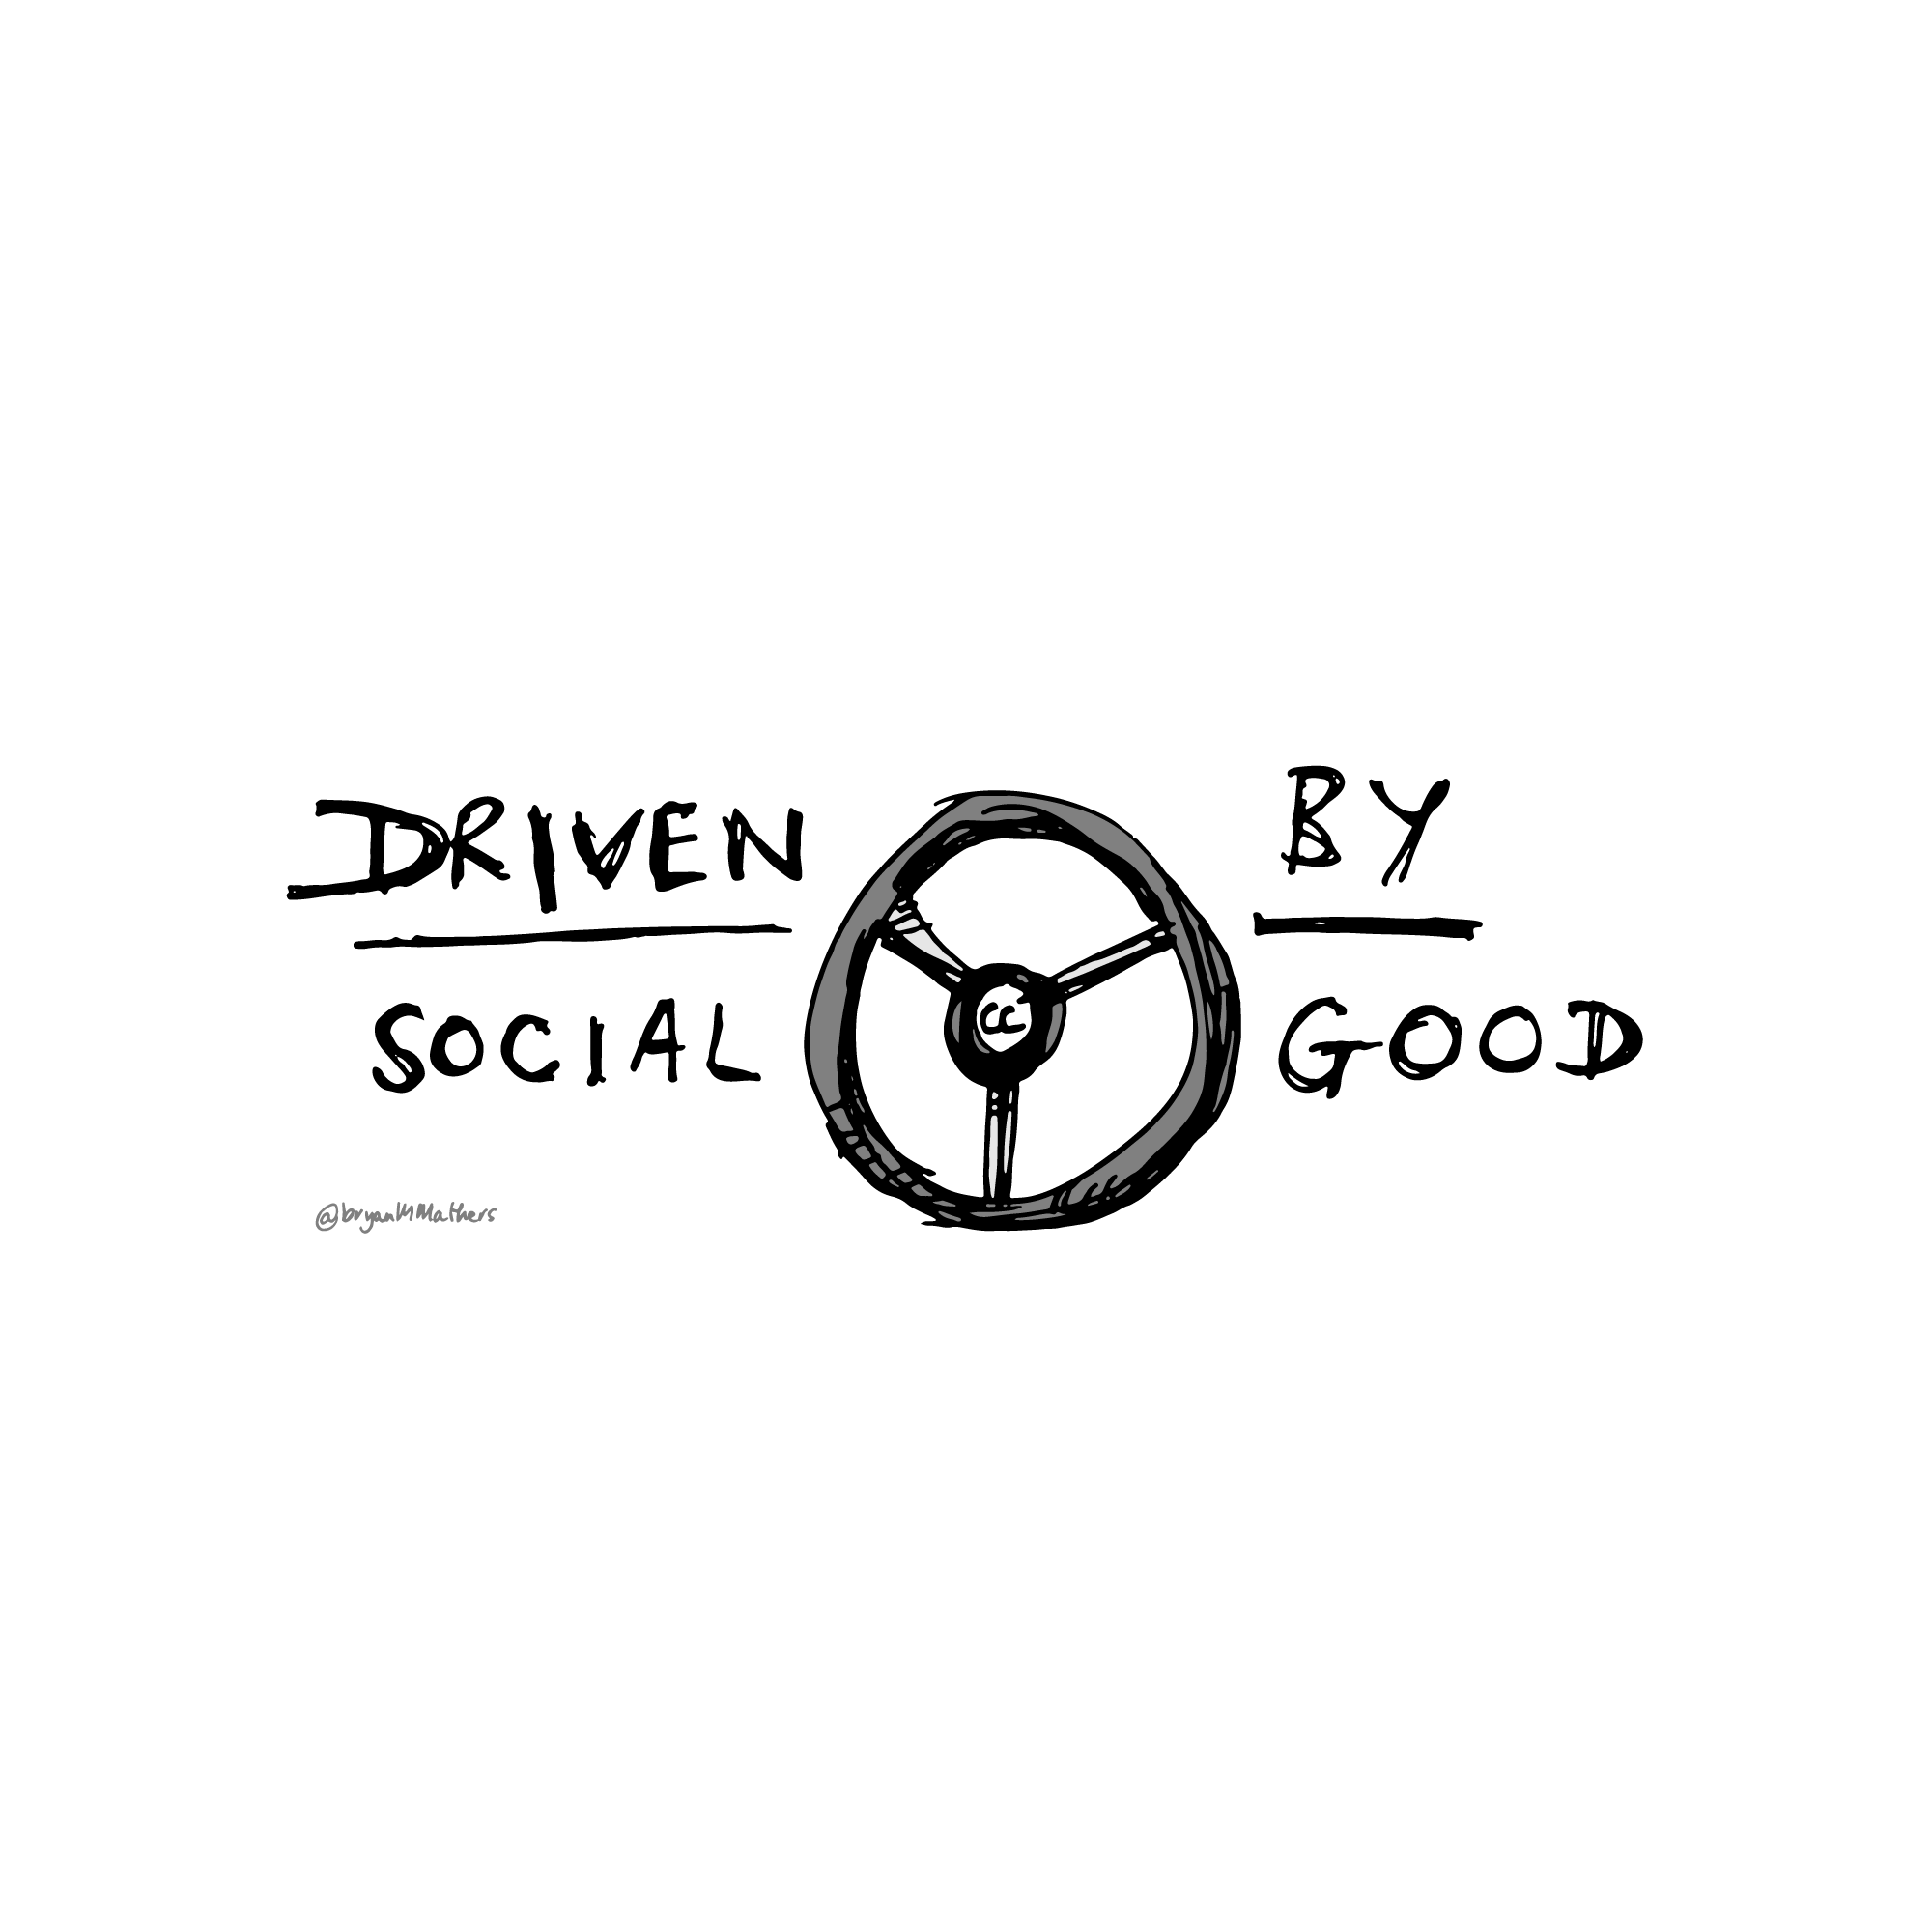 Driven by social good